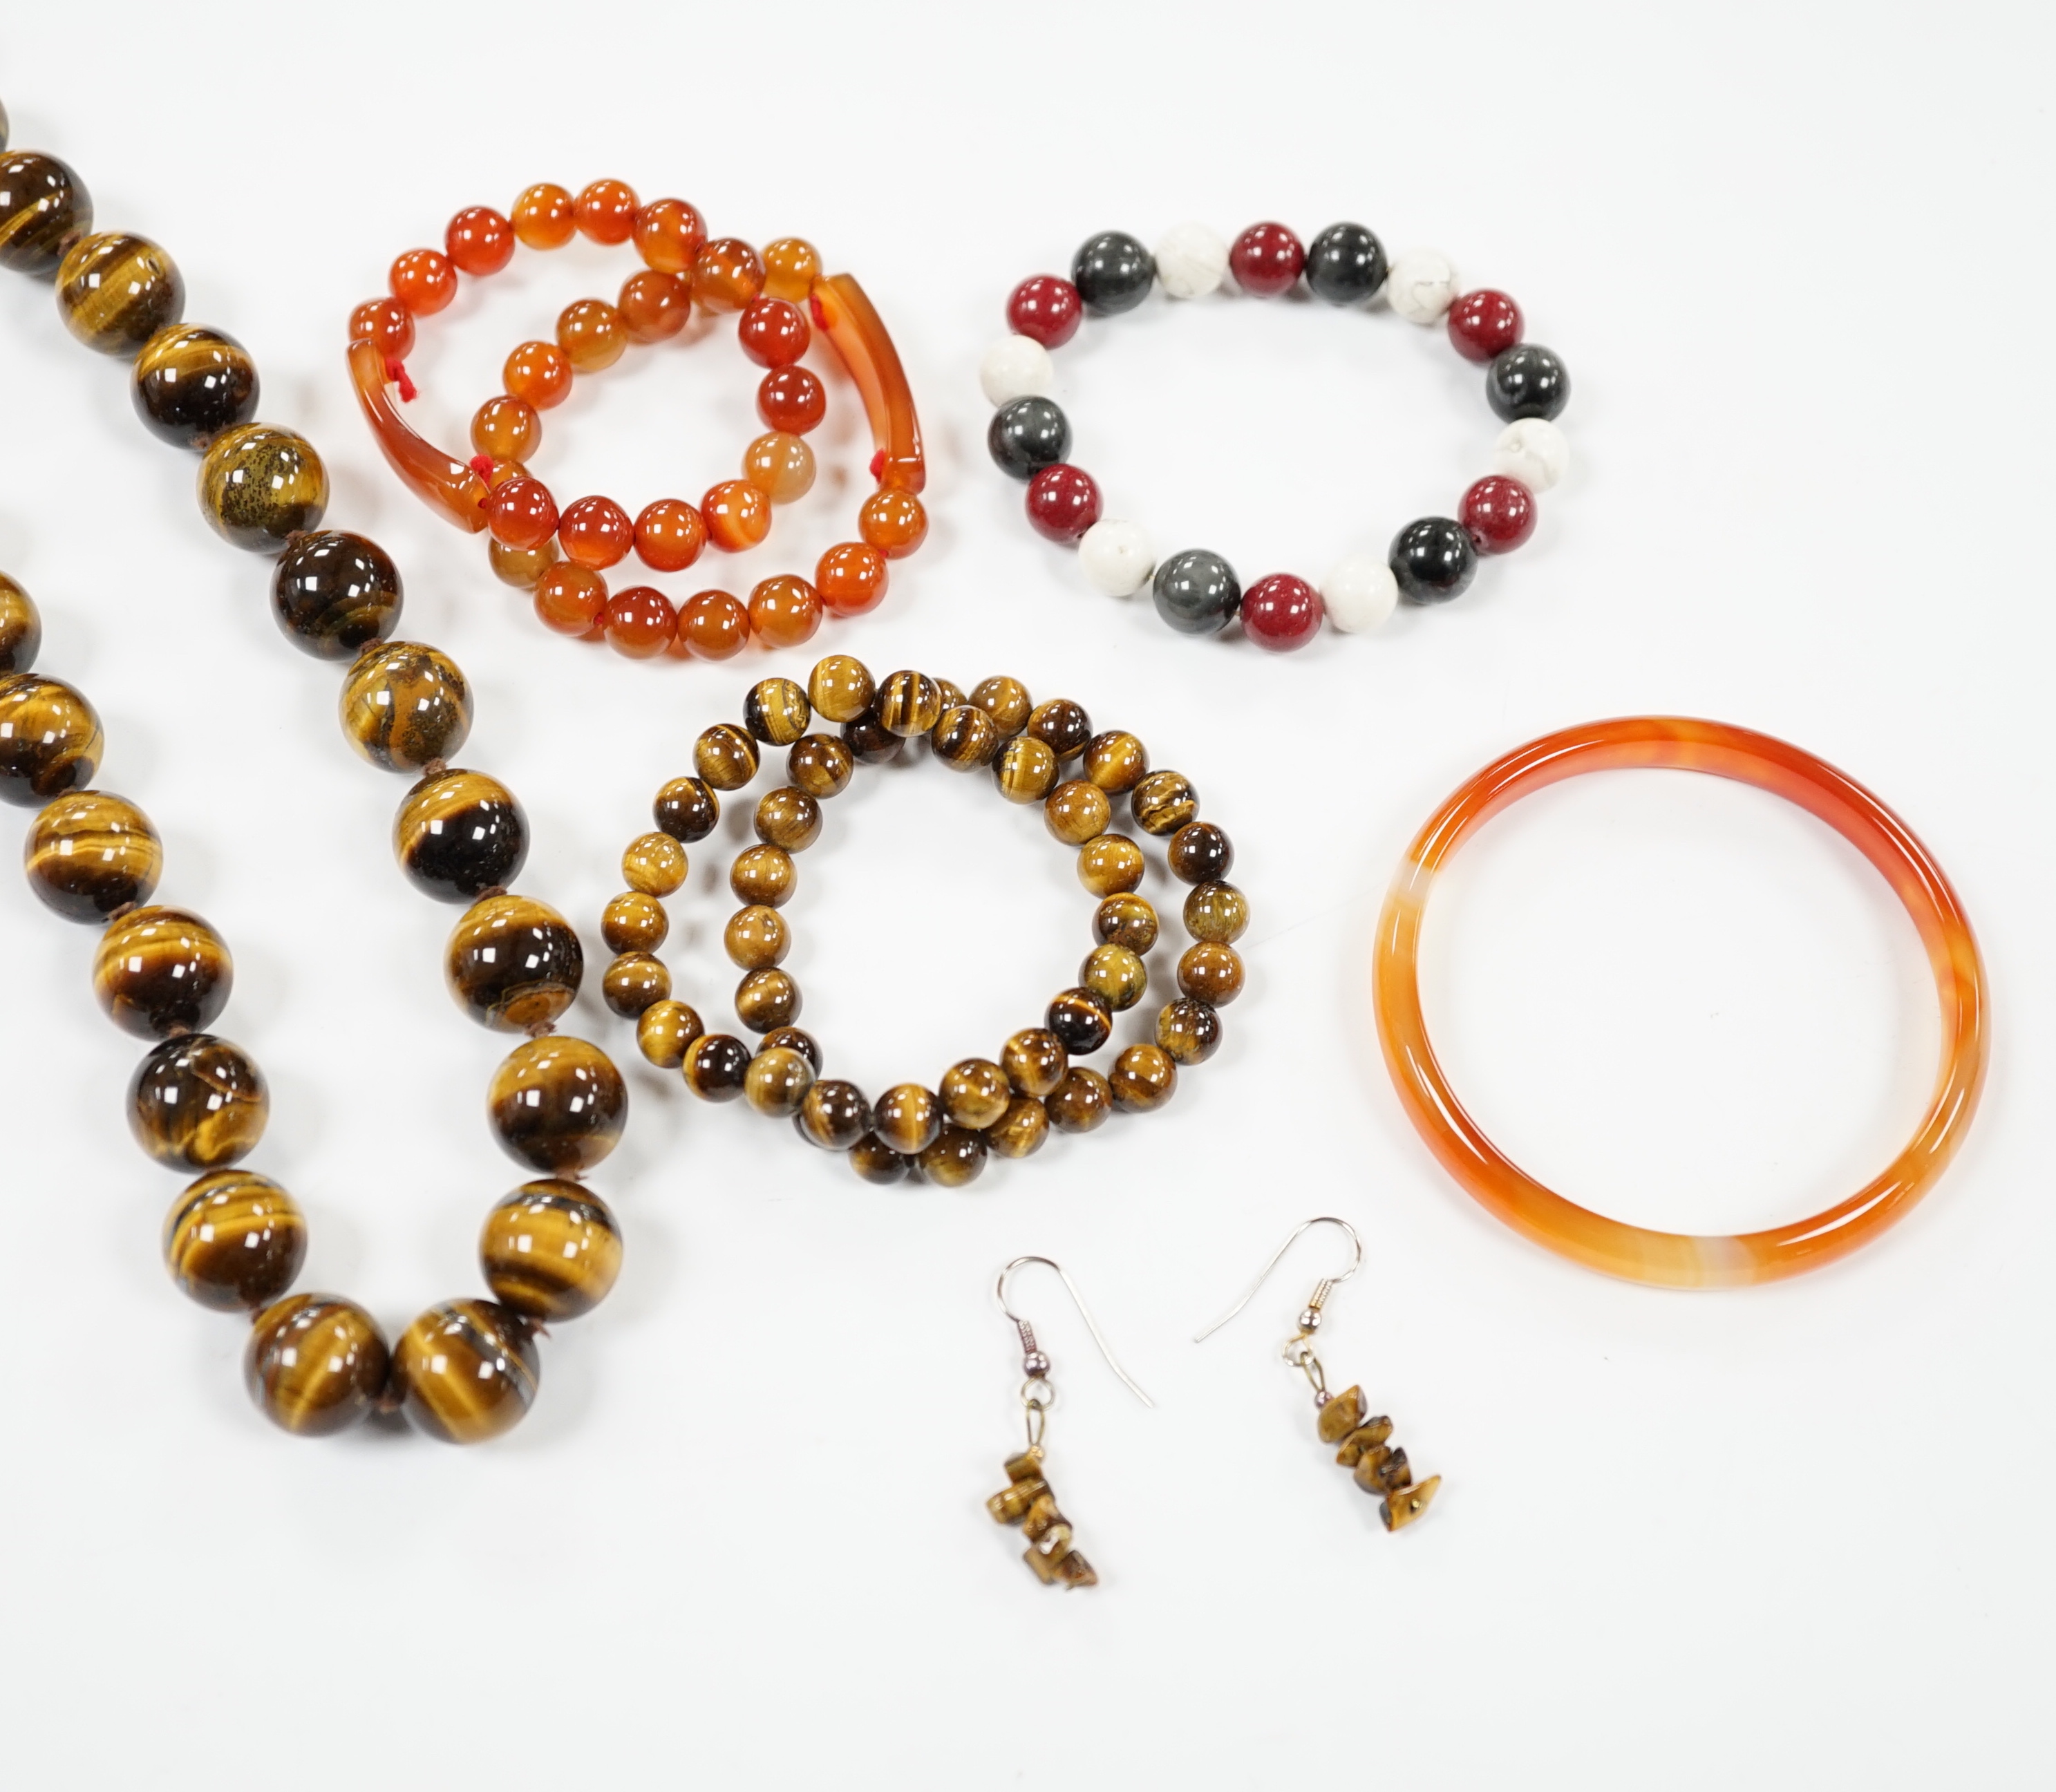 A tiger's eye quartz bead necklace, 44cm and two tiger's eye quartz bracelets, together with other bracelets including agate and loose beads.